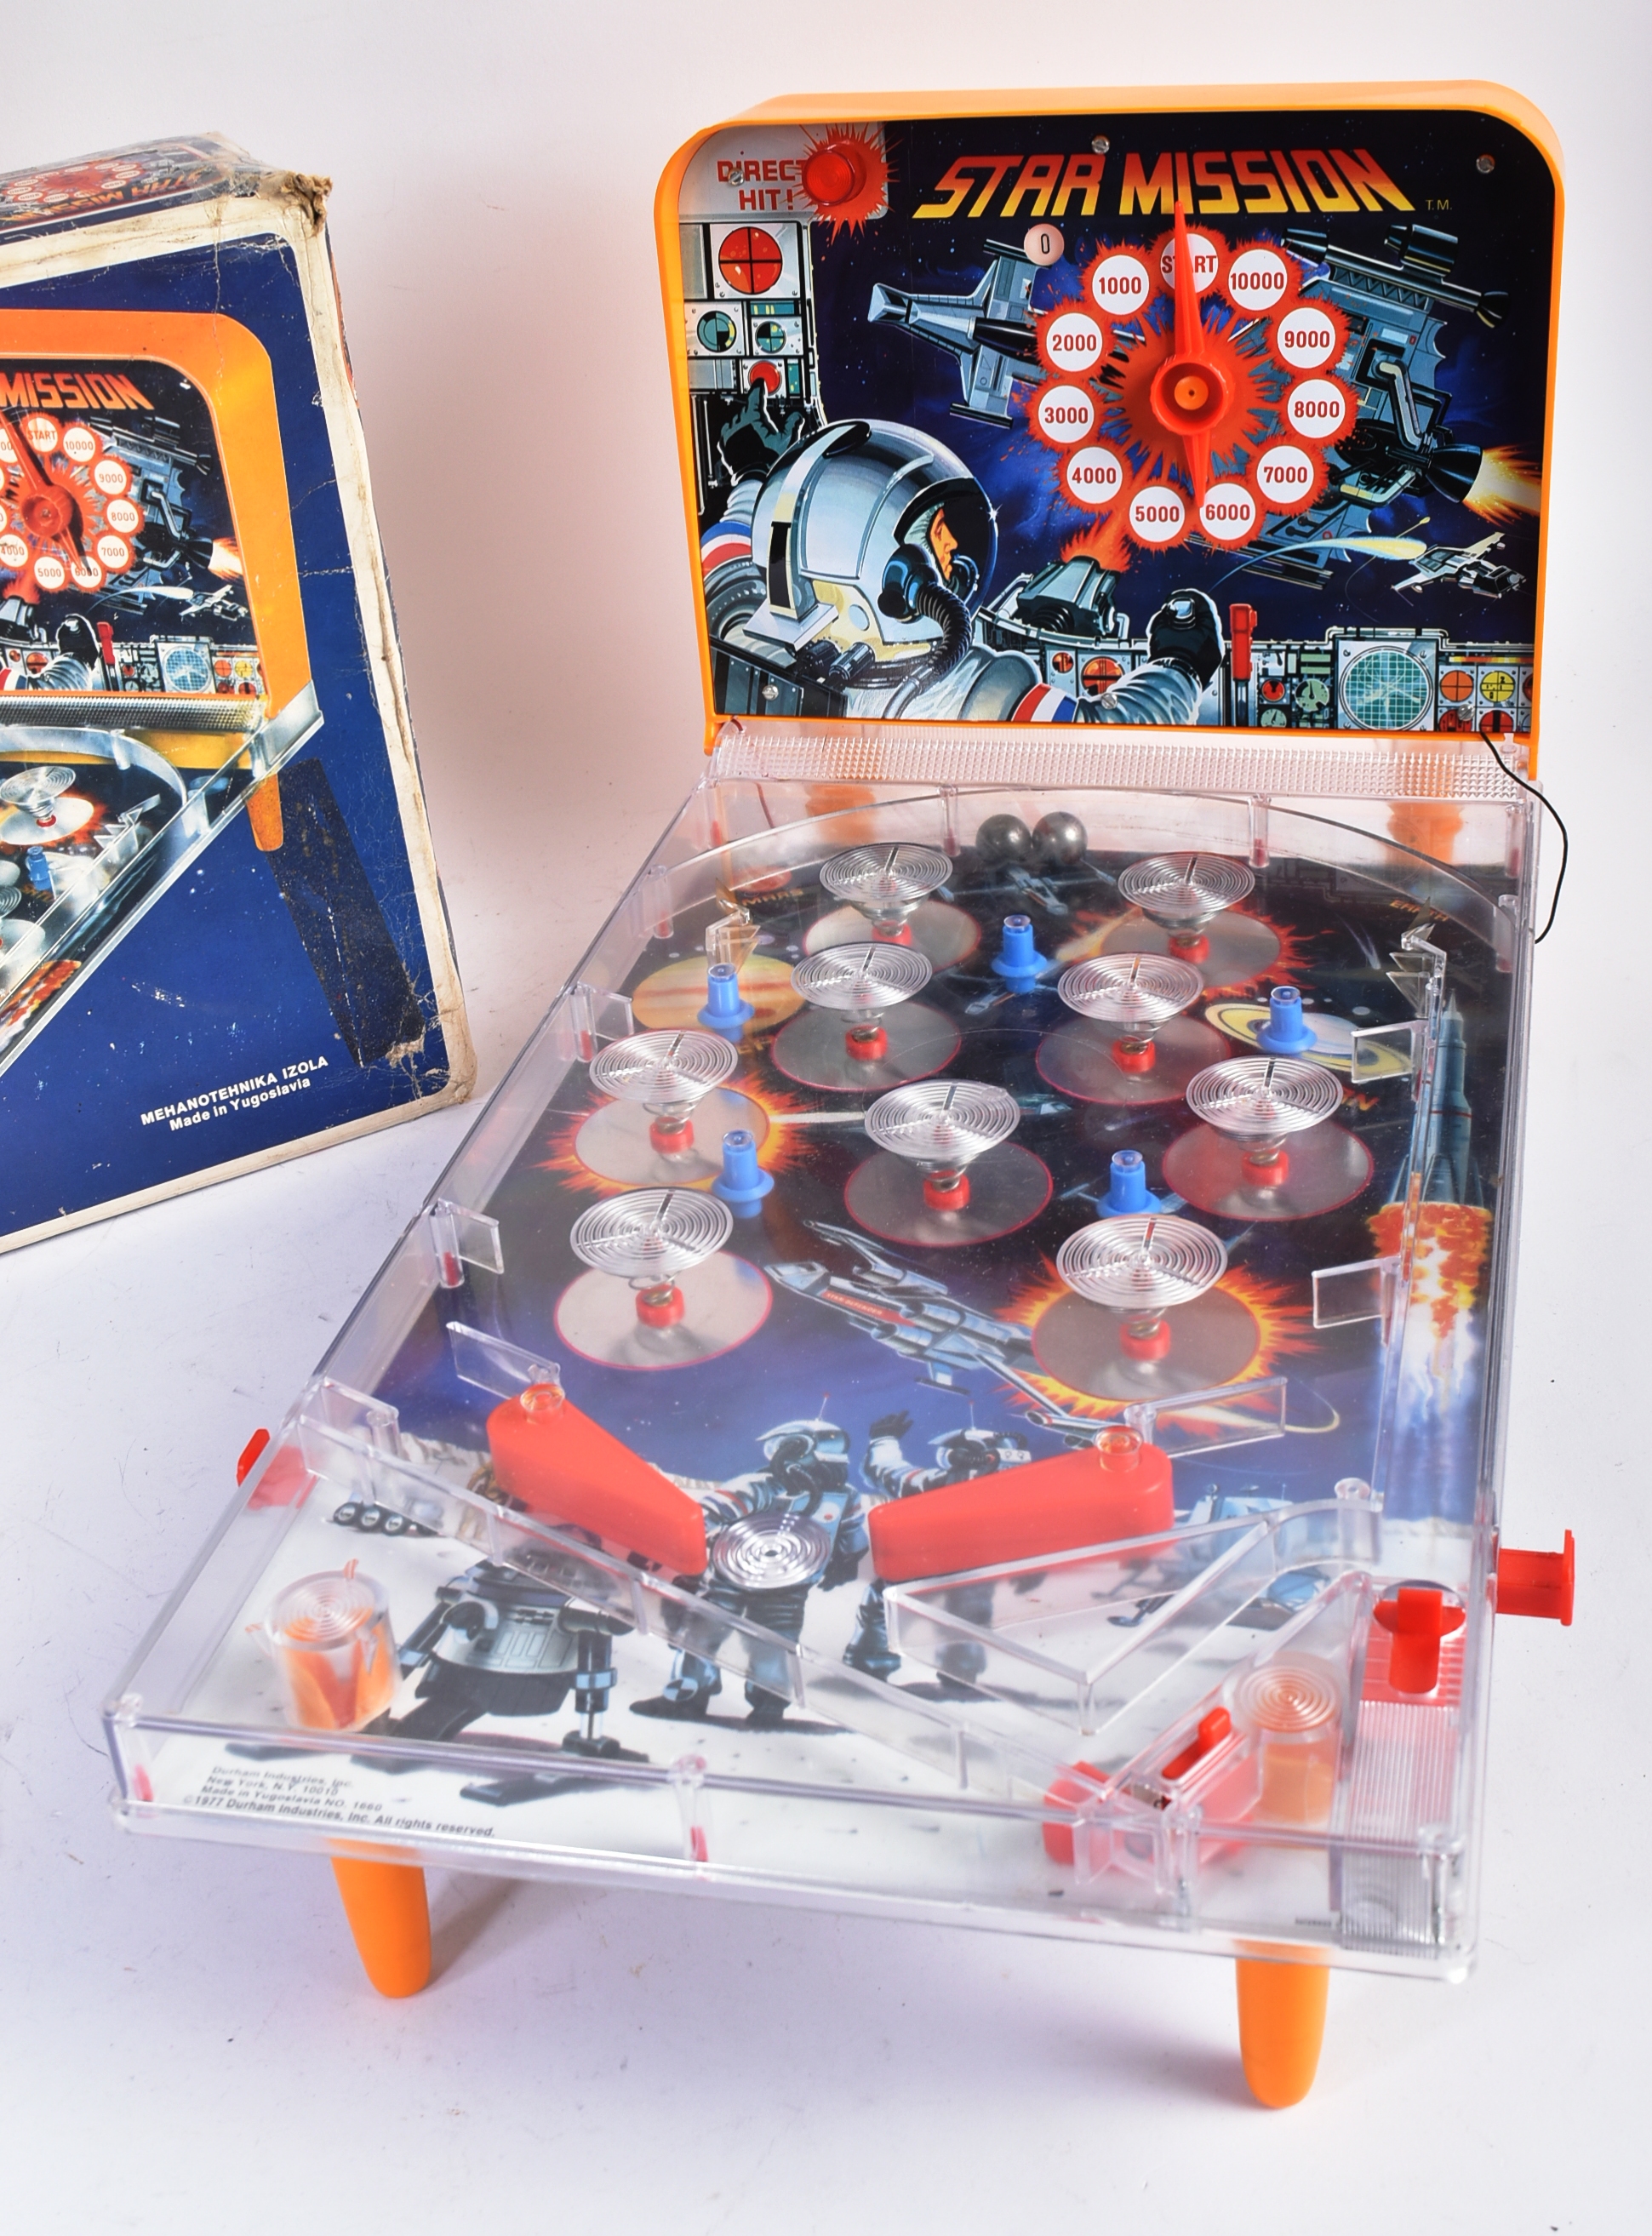 VINTAGE STAR MISSION ELECTRIC TABLE TOP PINBALL MACHINE - Image 2 of 4